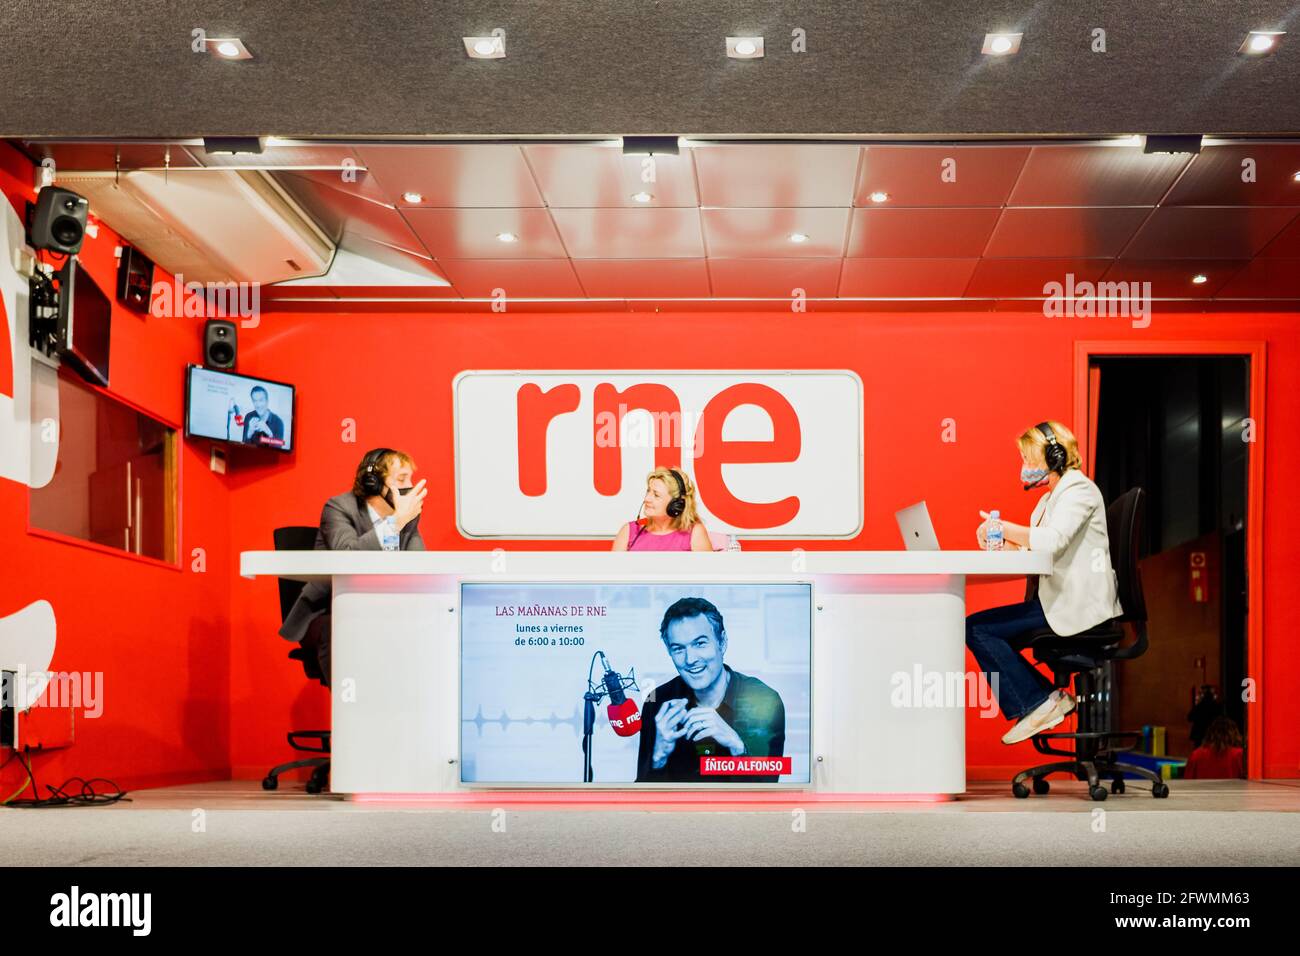 Madrid, Spain - May 20, 2021: Mobile radio set broadcasting a live RNE talk  show Stock Photo - Alamy